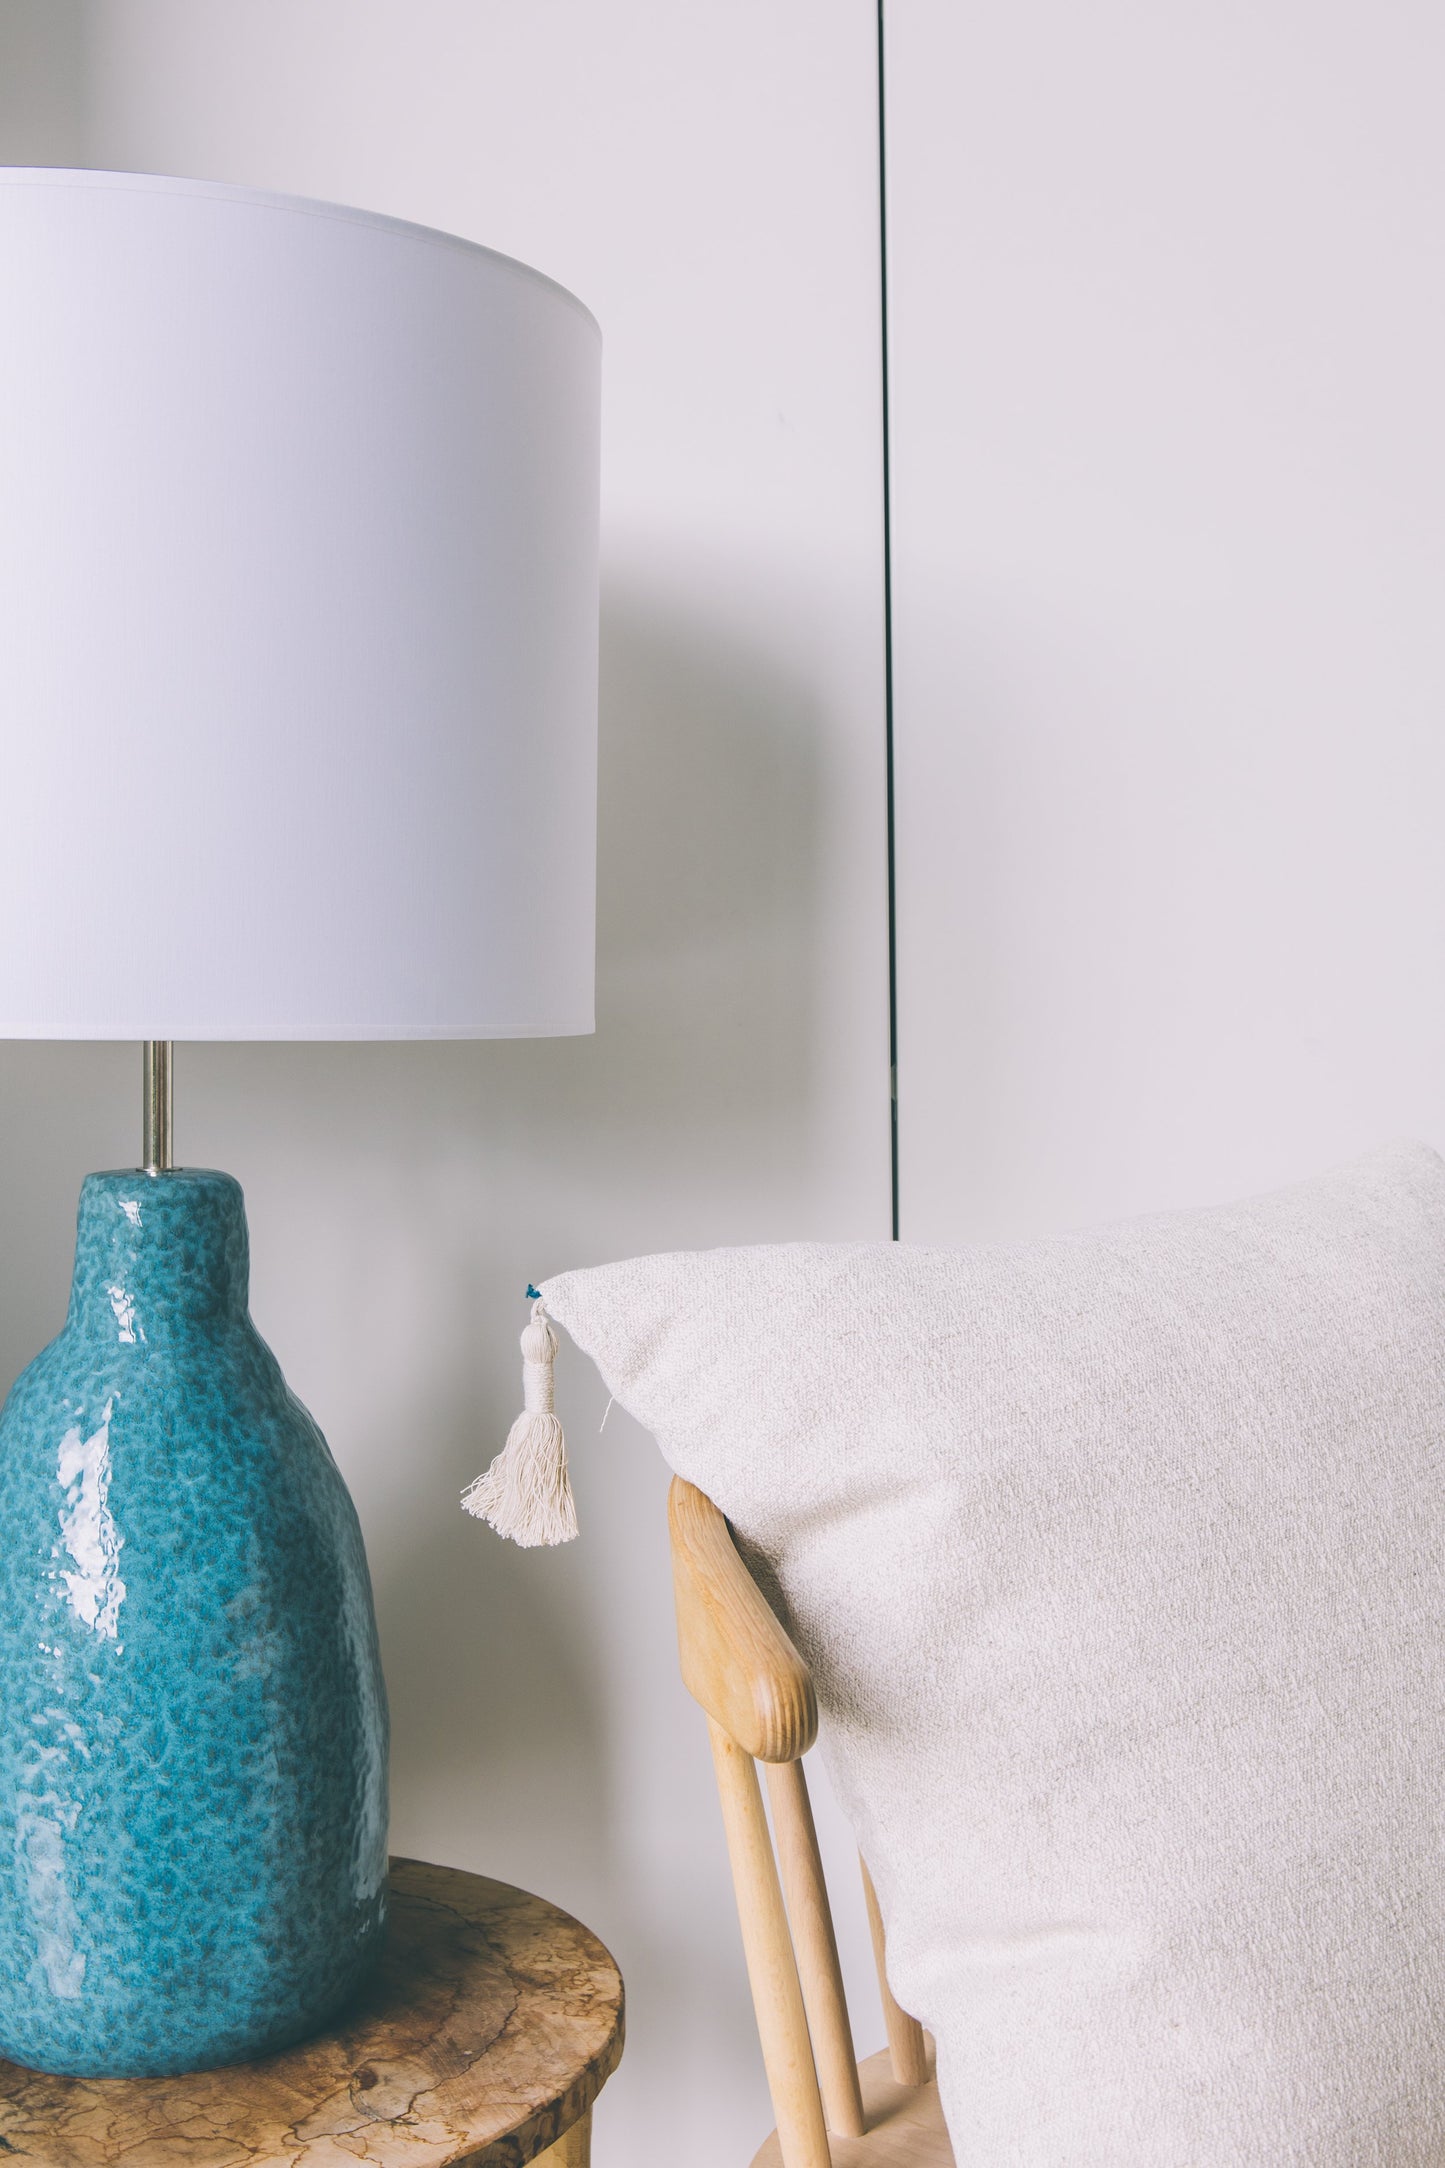 Ceramic Table Lamp with Reactive Blue Glaze